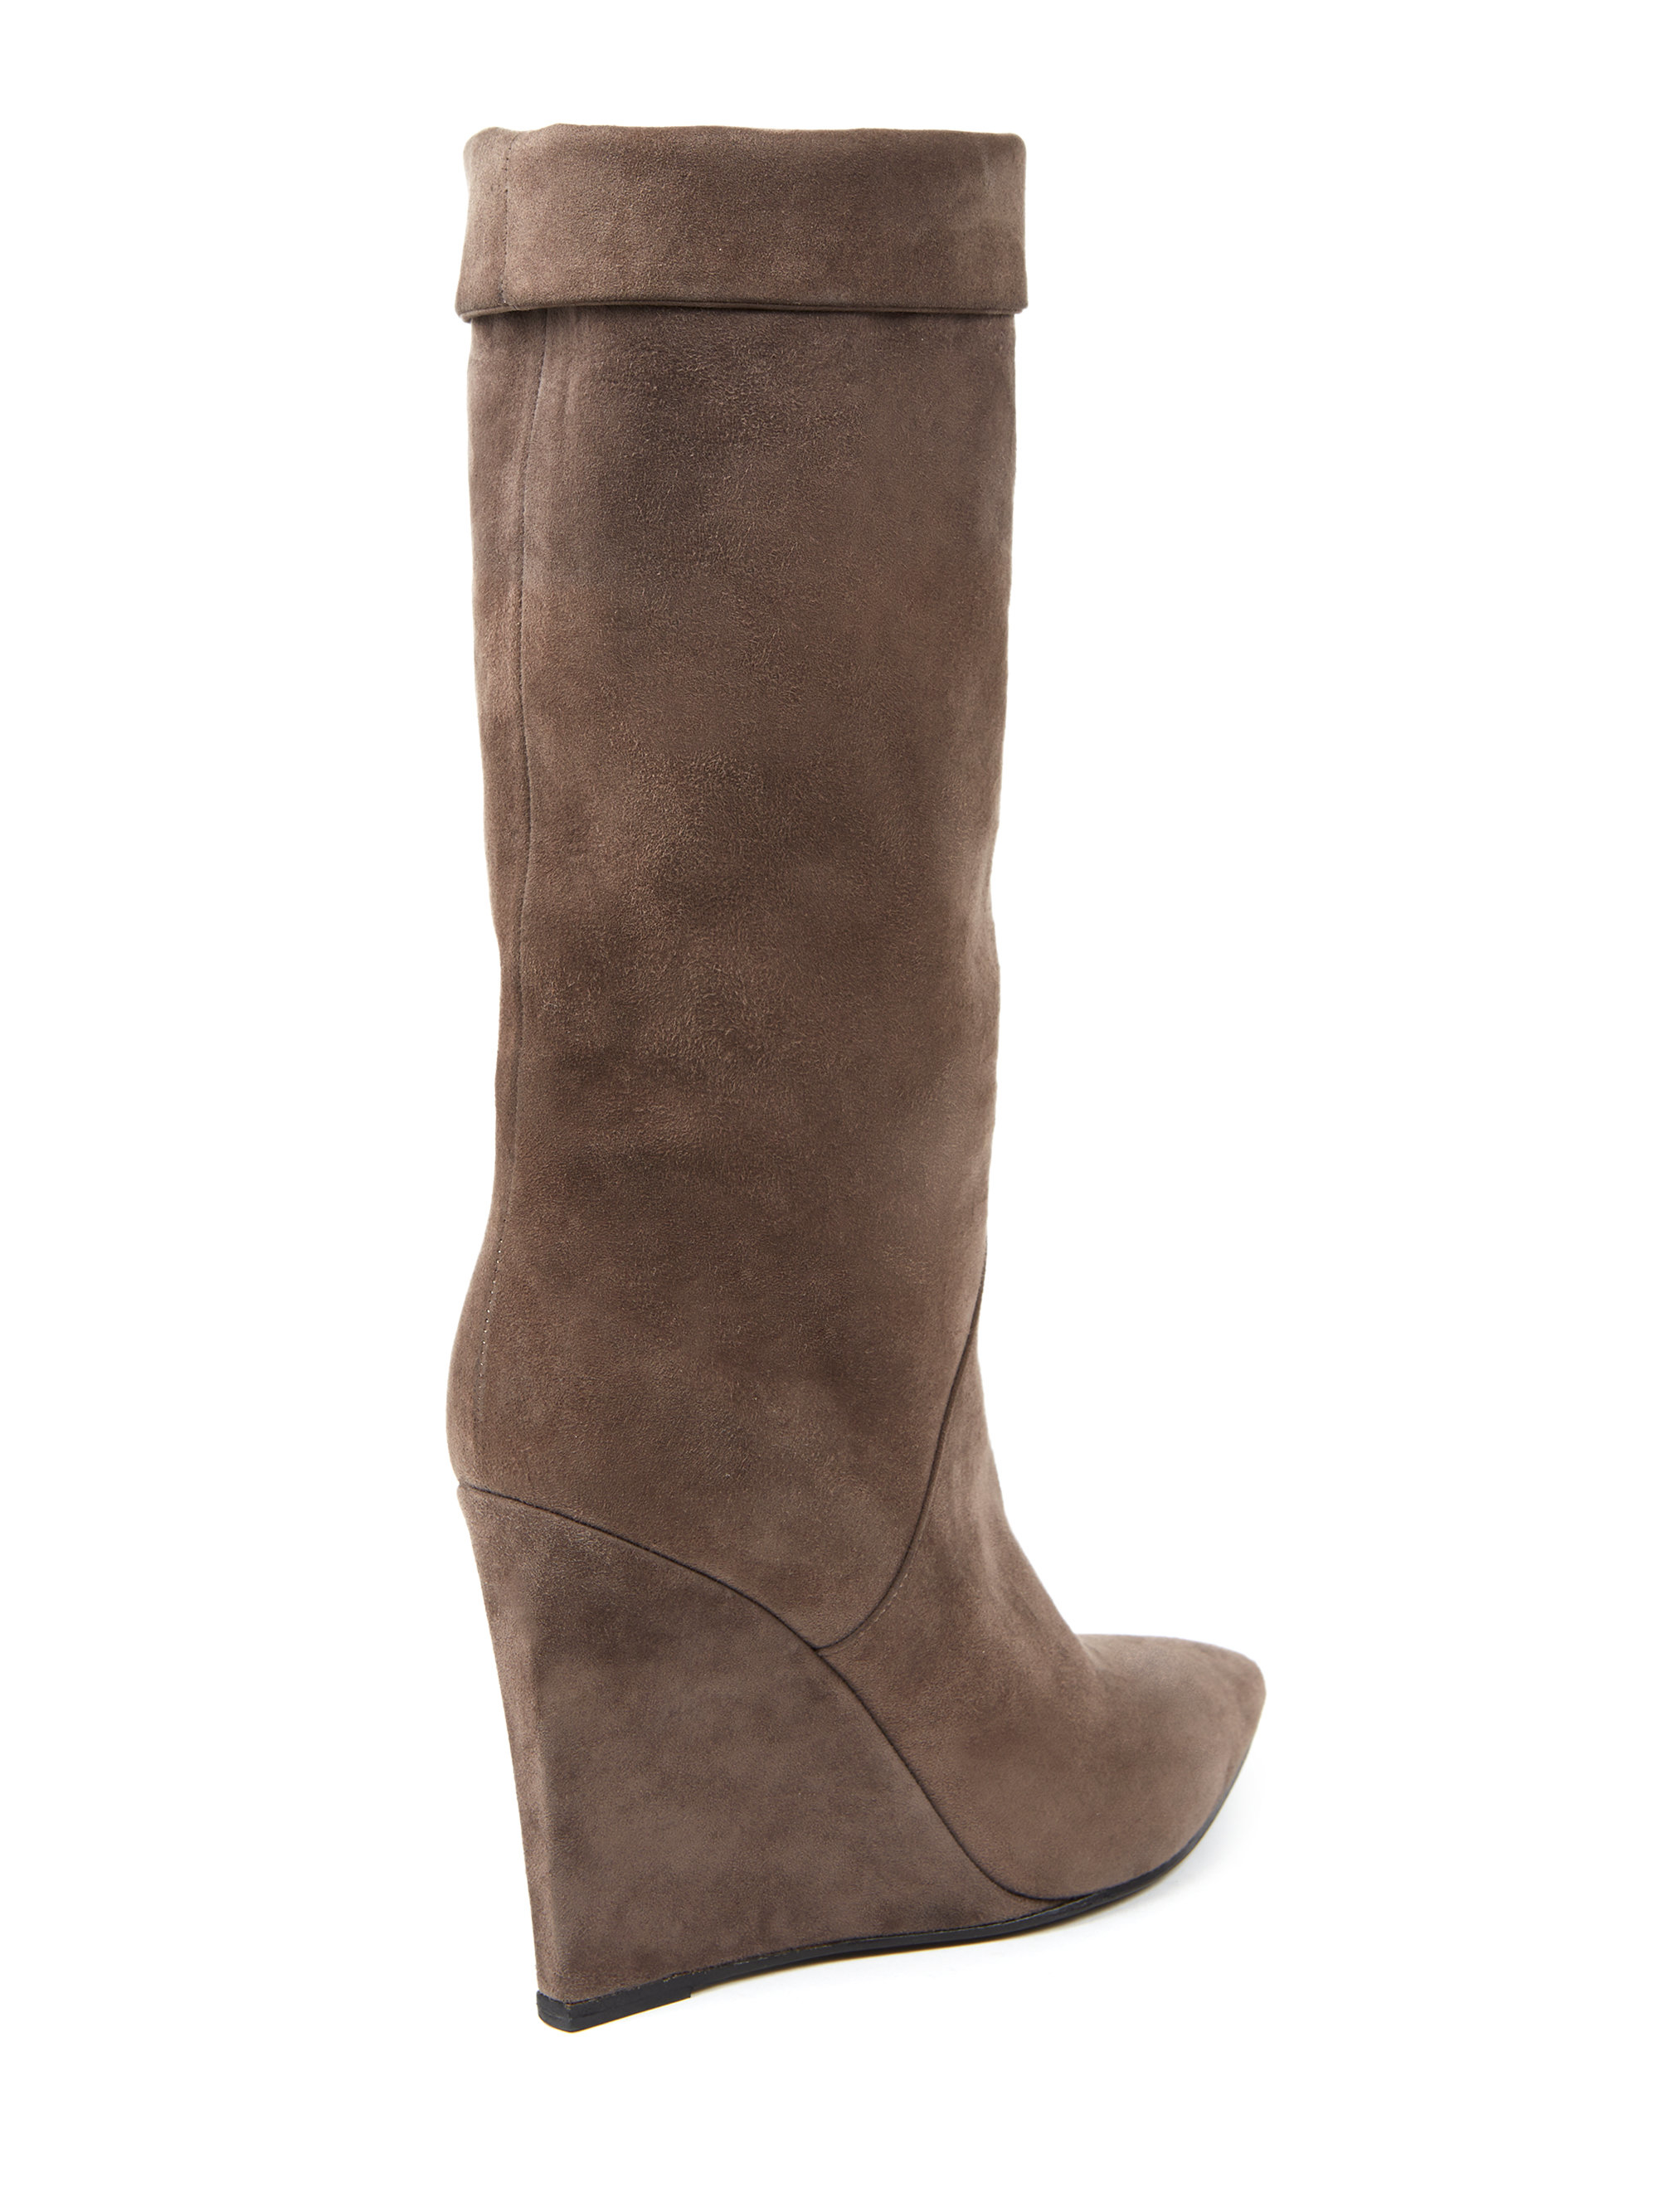 mid calf wedge boots